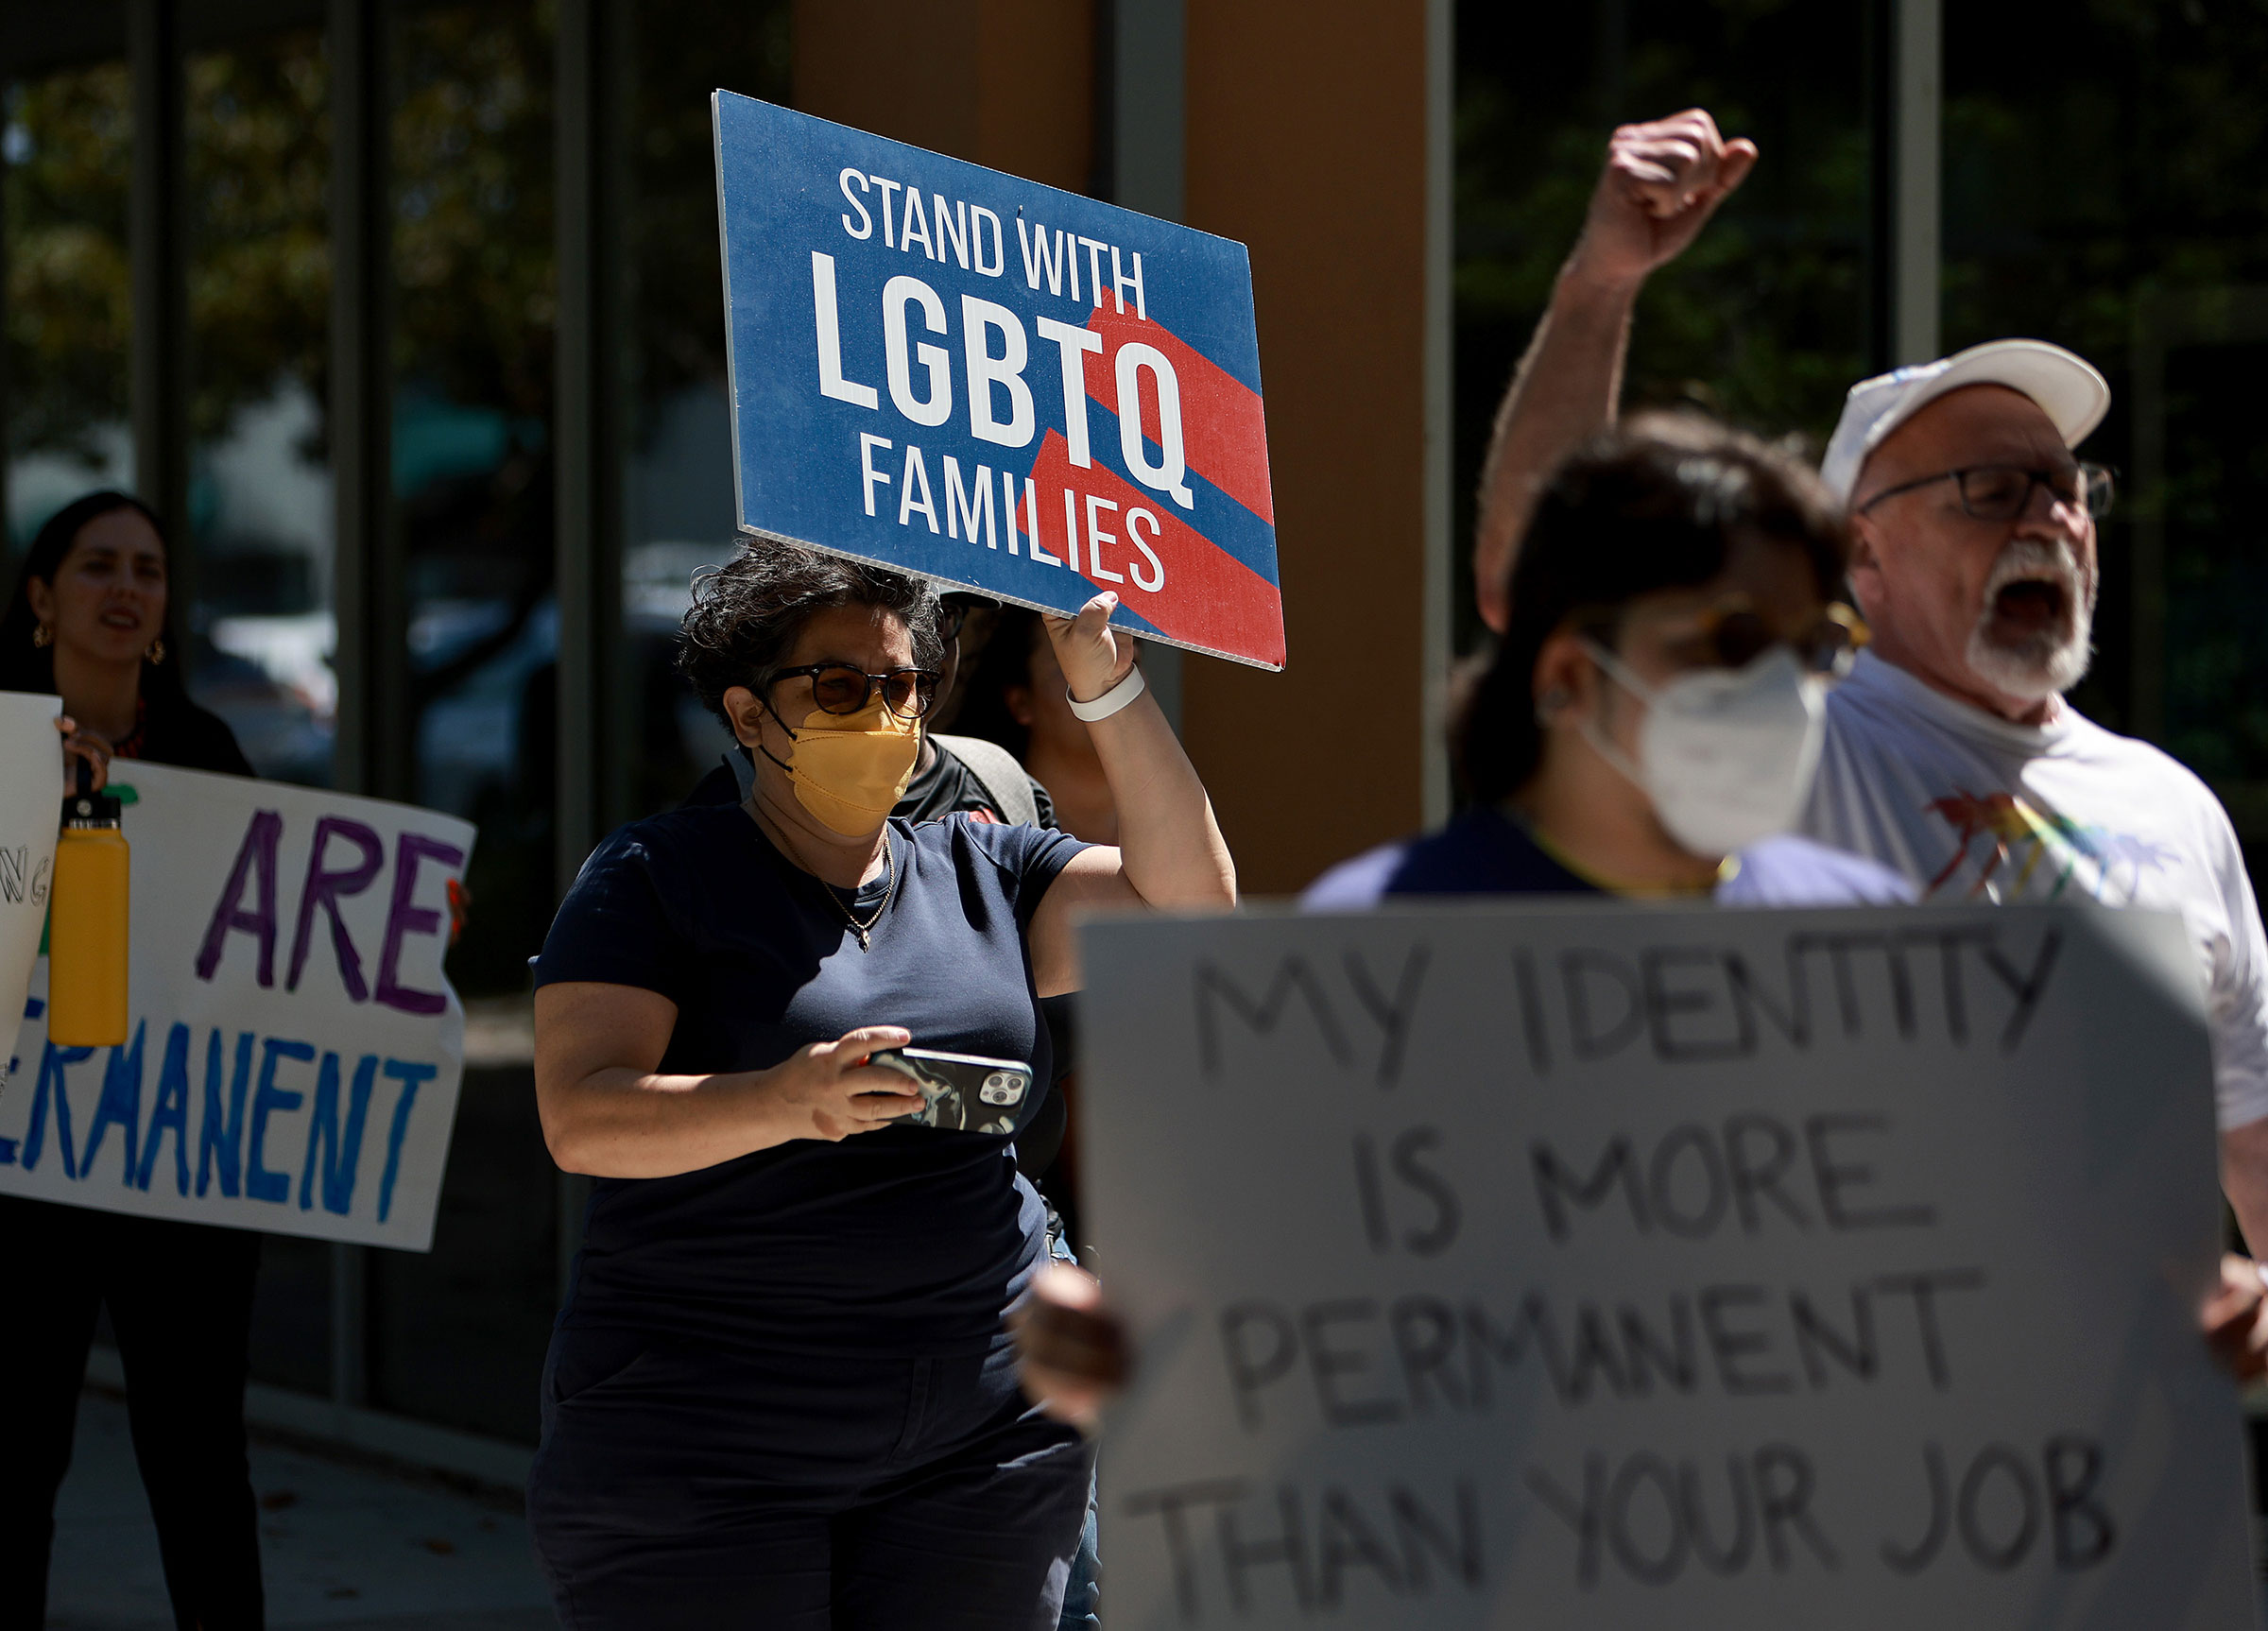 People protest in front of Florida State Senator Ileana Garcia's office after the passage of the Parental Rights in Education bill in Miami, on March 9, 2022.